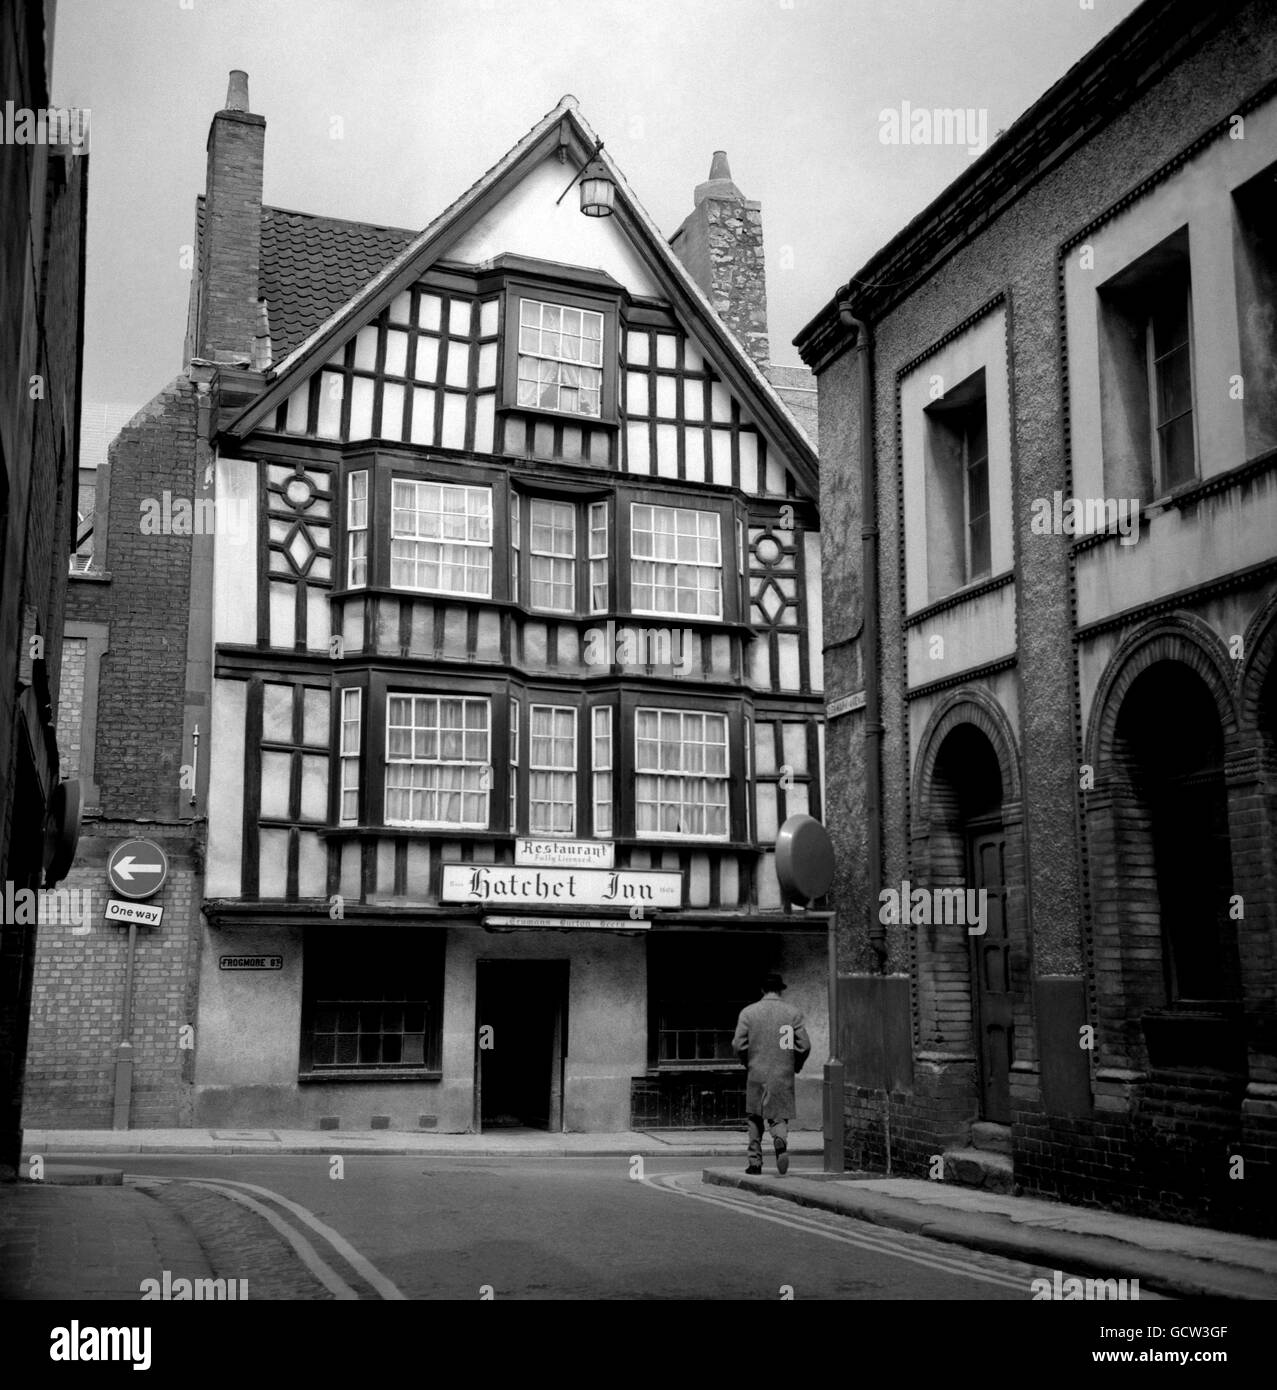 From a structural point of view, 'The Hatchet' is Bristol's oldest inn. Long before 1606, the date the building became an inn, the Hatchet stood as Frogmore Farm, giving its name to the street it stands on. Stock Photo